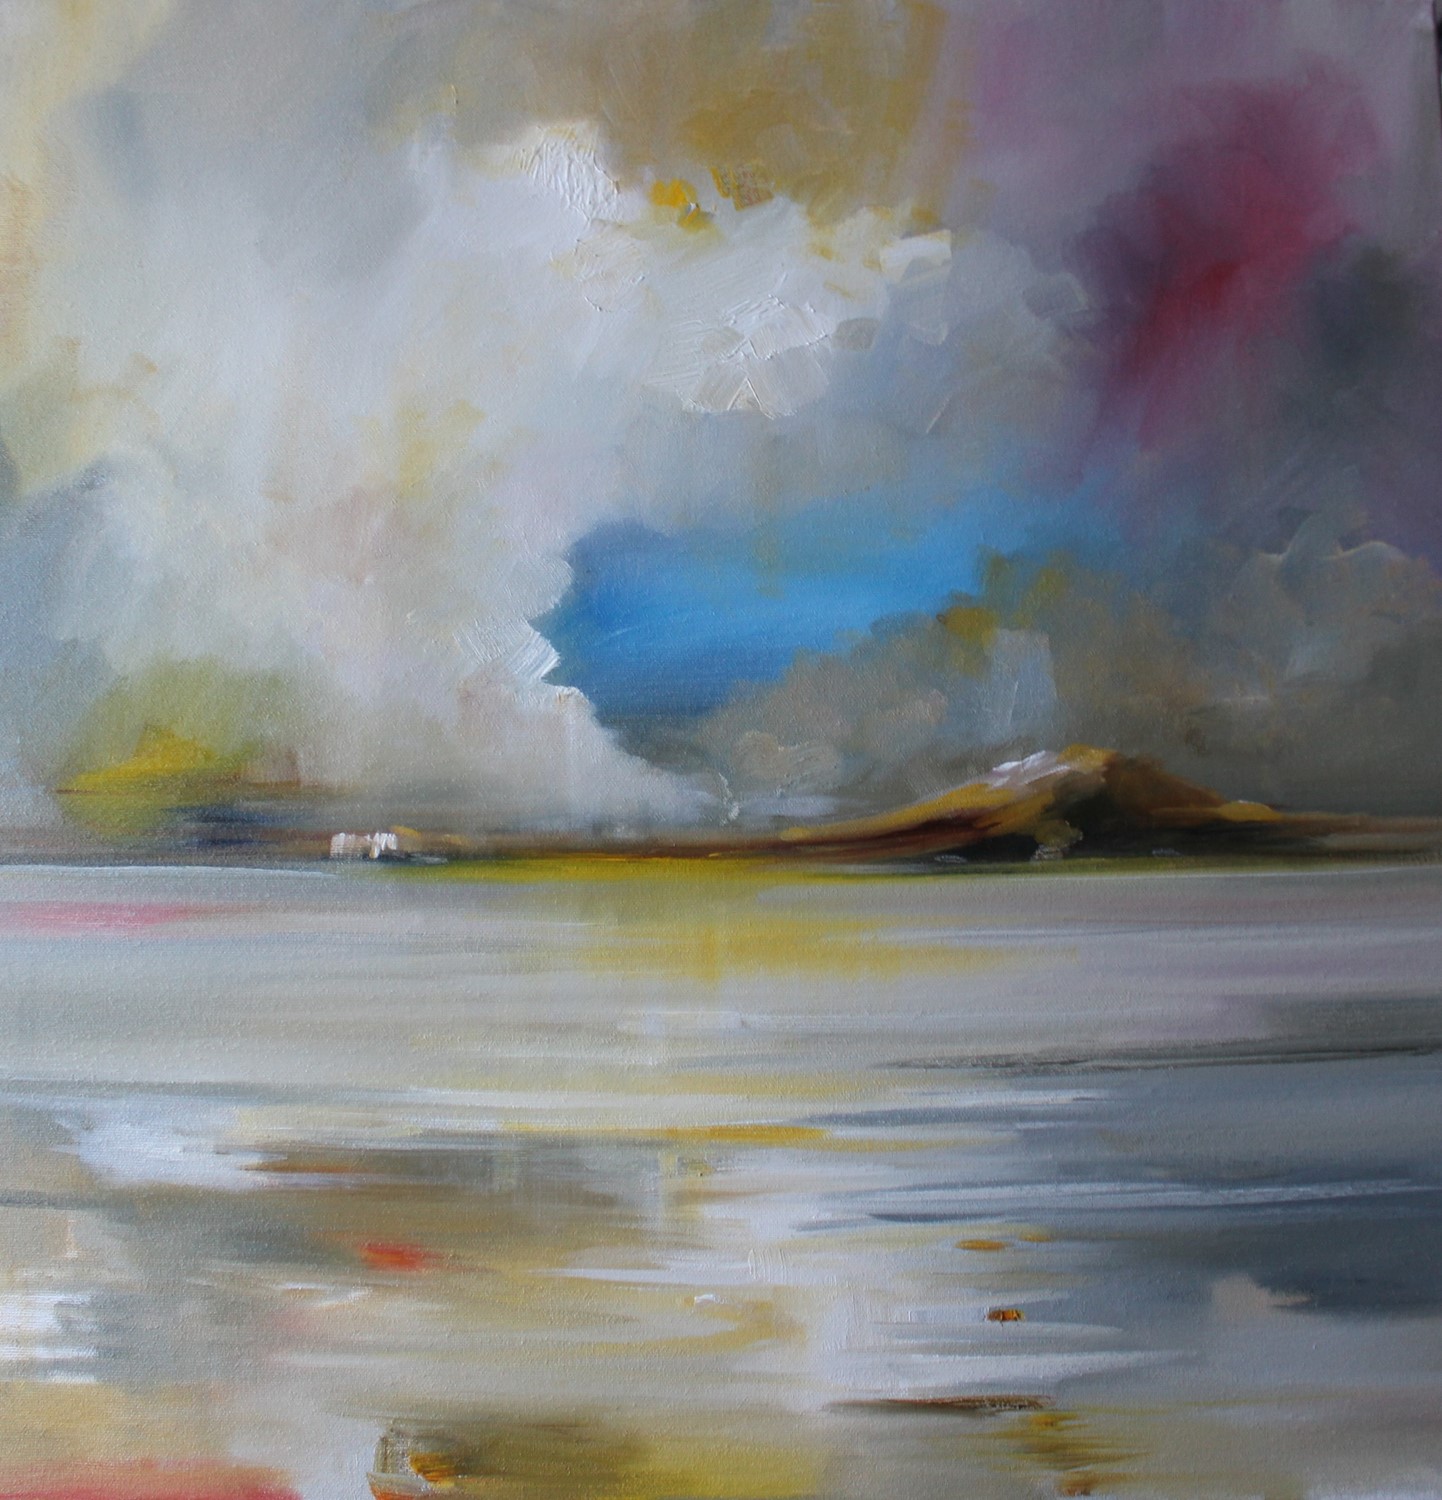 'Storm Clouds are Clearing' by artist Rosanne Barr